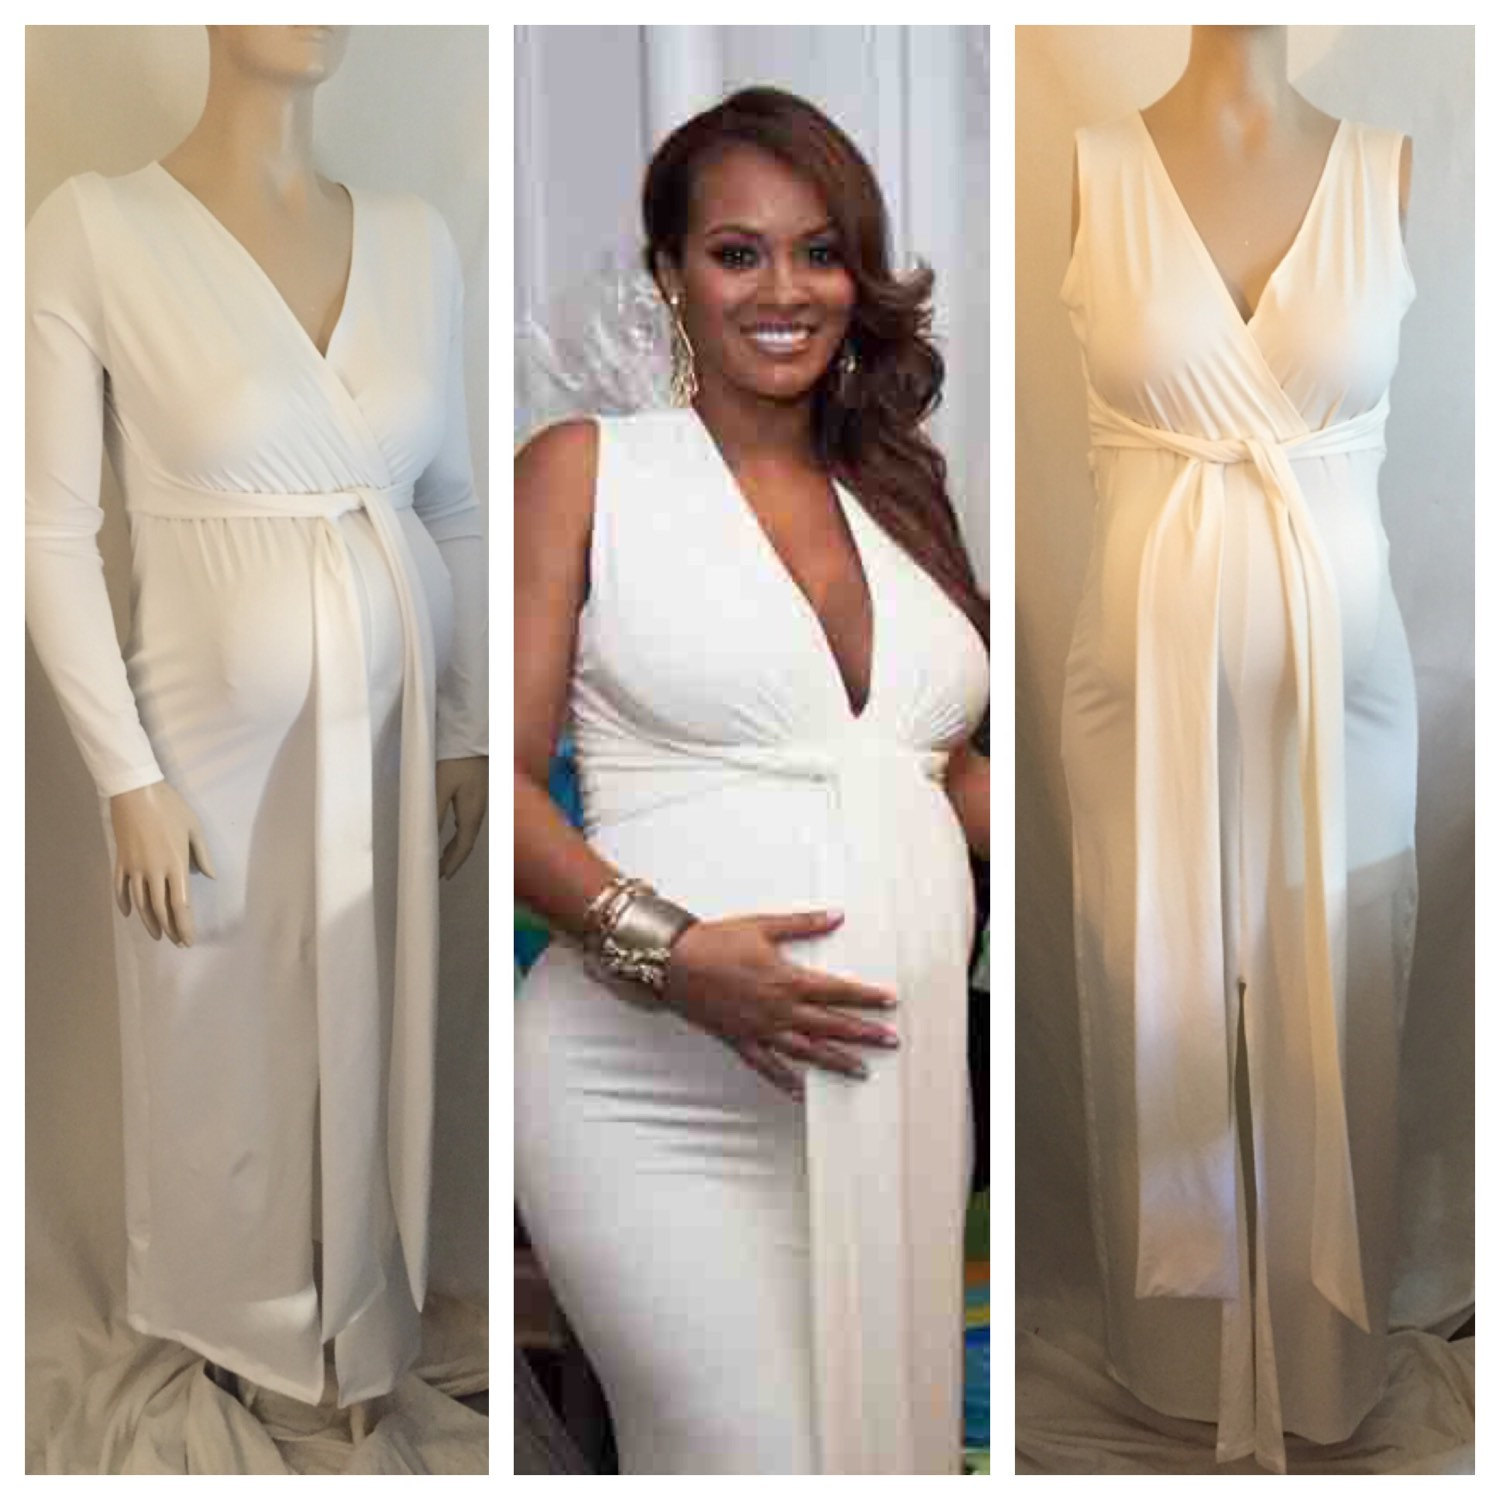 Full Size of Baby Shower:what Should I Wear To My Baby Shower Cute Baby Shower Outfits For Mom Stylish Maternity Dresses For Baby Shower Maternity Clothes Target Baby Shower Dresses For Winter Pink Maternity Dress Baby Shower Outfits For Dad Best Maternity Dresses For Baby Shower